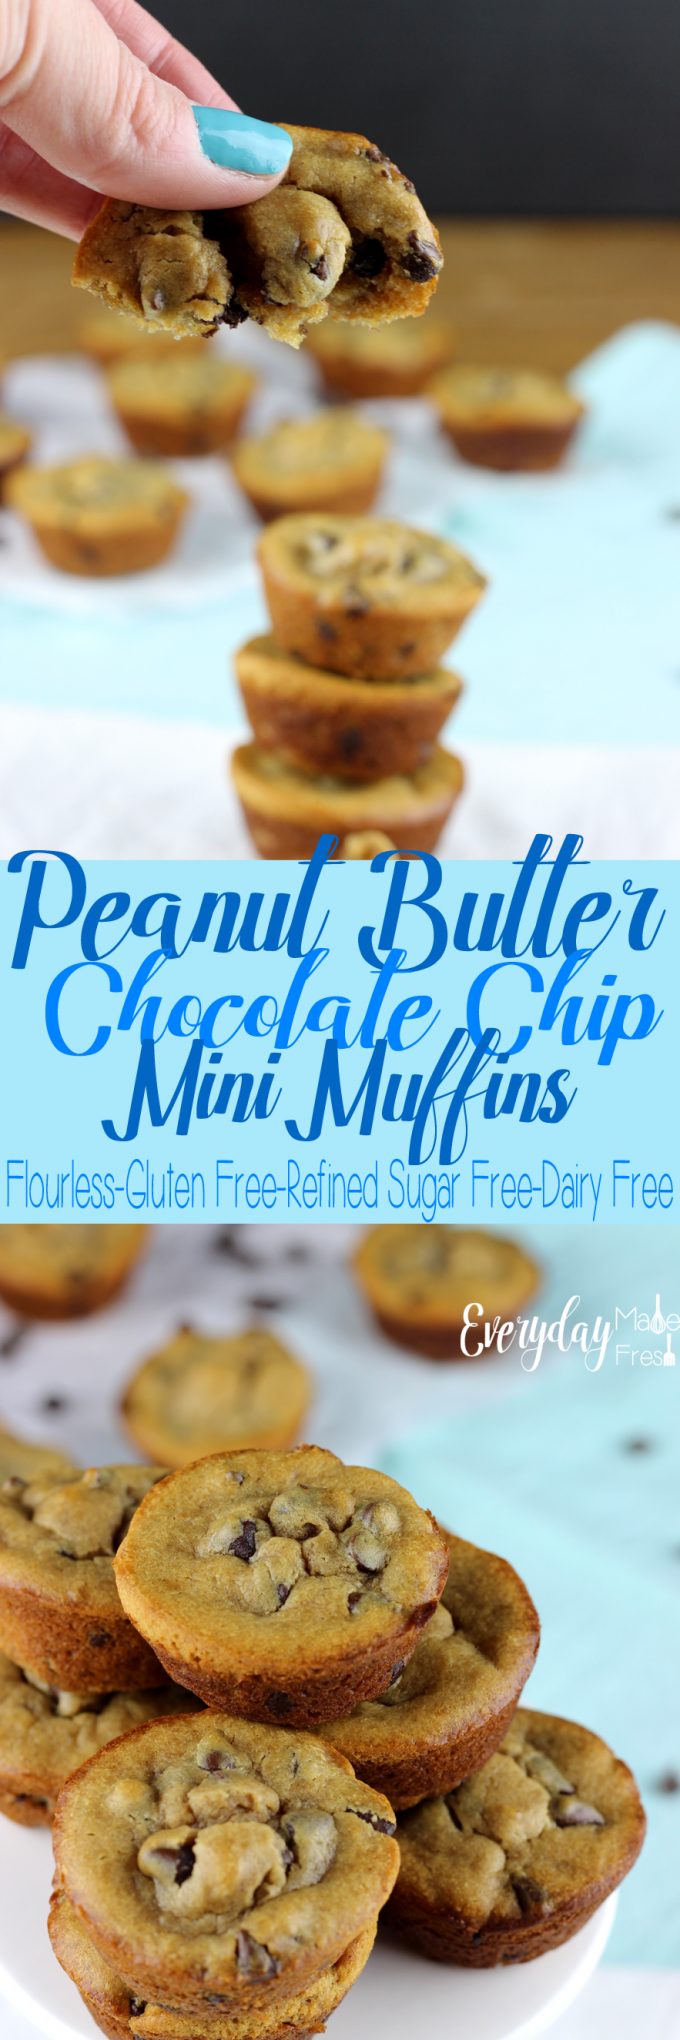 These Peanut Butter Chocolate Chip Mini Muffins are sweetened with honey, gluten free, and dairy free! They are made in a blender for a easy clean-up, and bake in less than 10 minutes. | EverydayMadeFresh.com